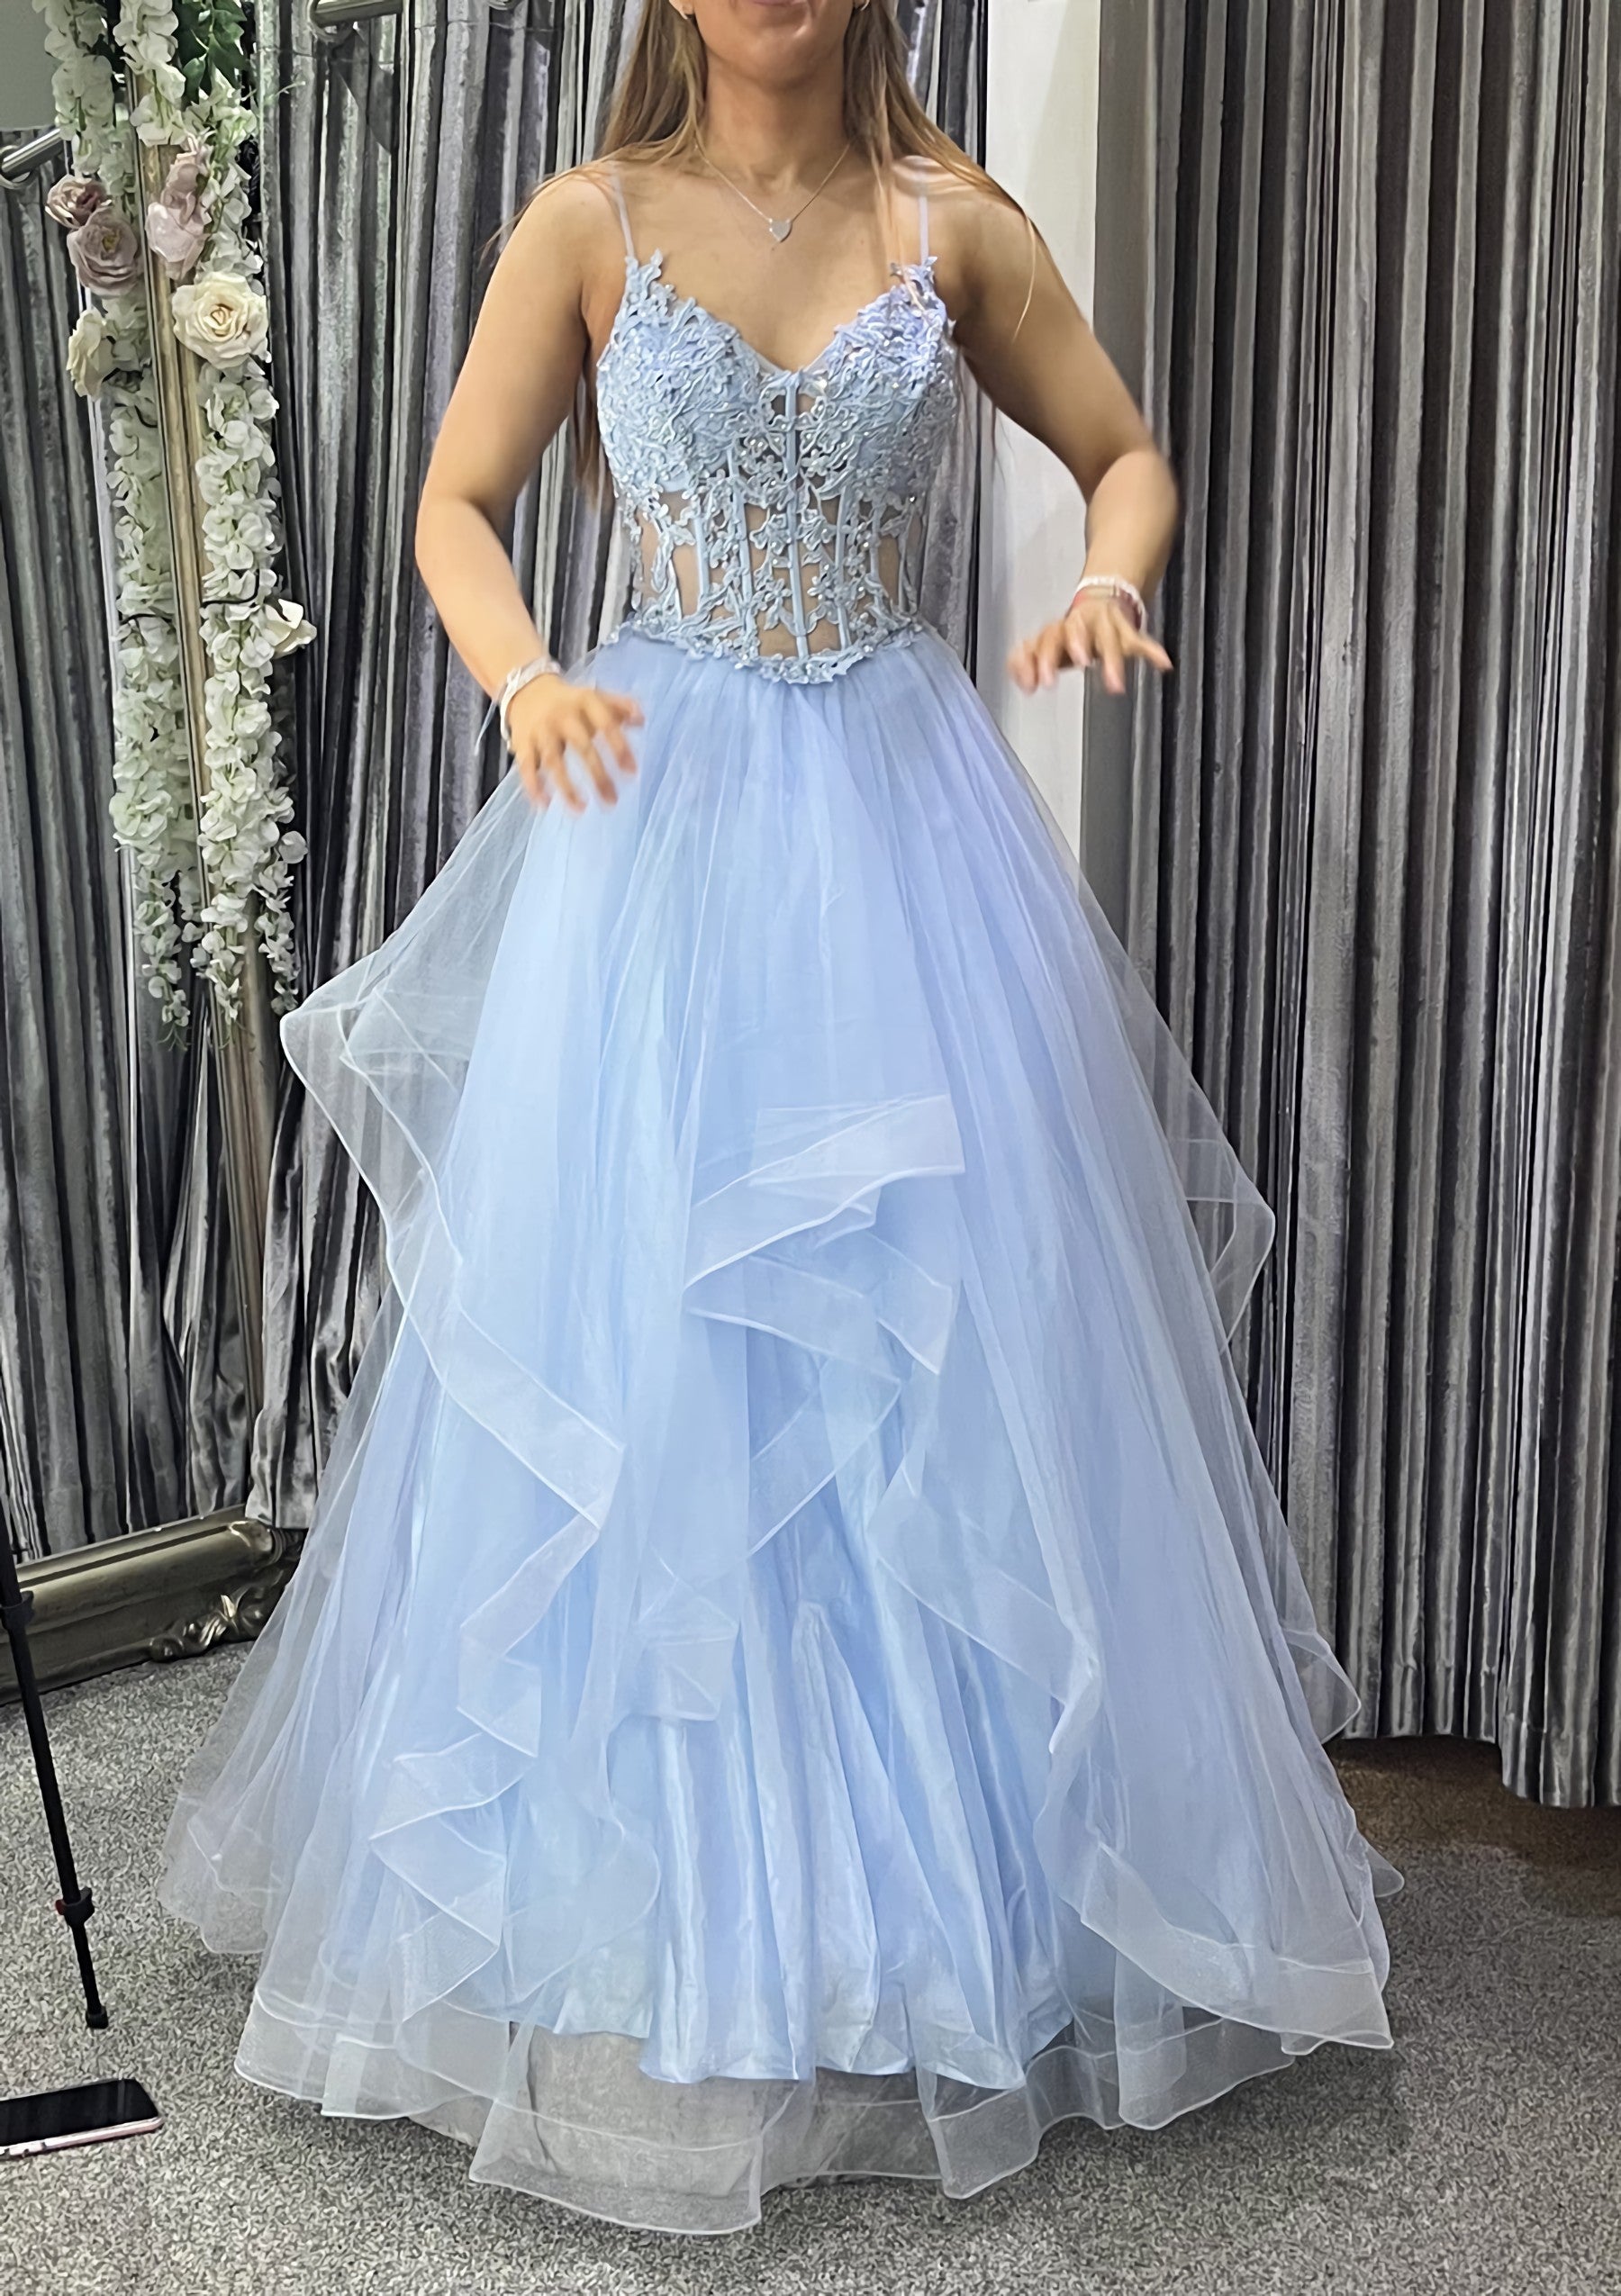 A Line V Neck Sleeveless Long Floor Length Tulle Charmeuse Prom Dress With Appliqued Lace